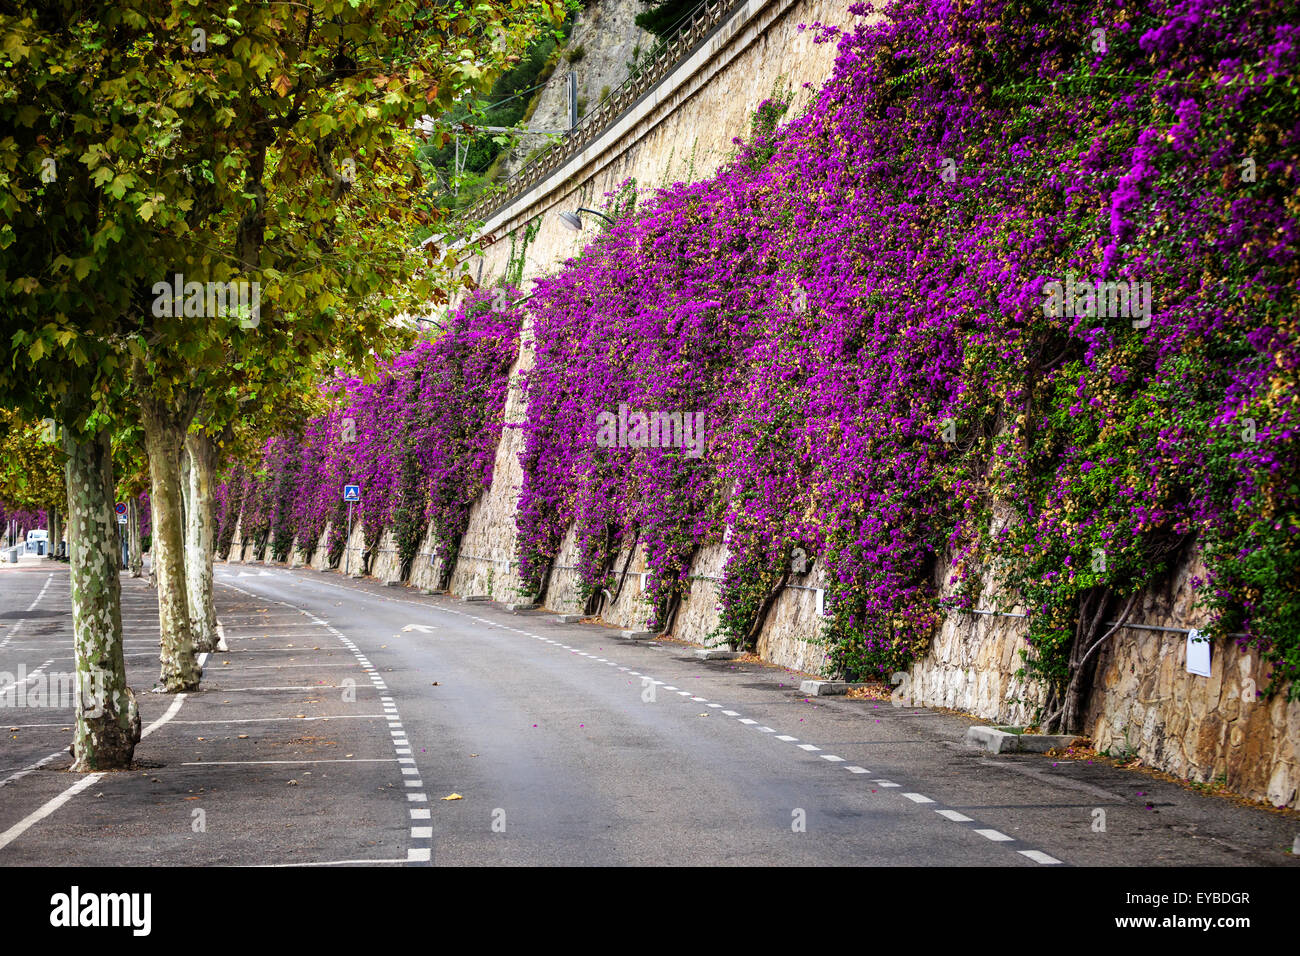 Mediterranean flowering shrub pink bougainvillea climbing stone wall  at beach road in Villefranche-sur-Mer, France Stock Photo